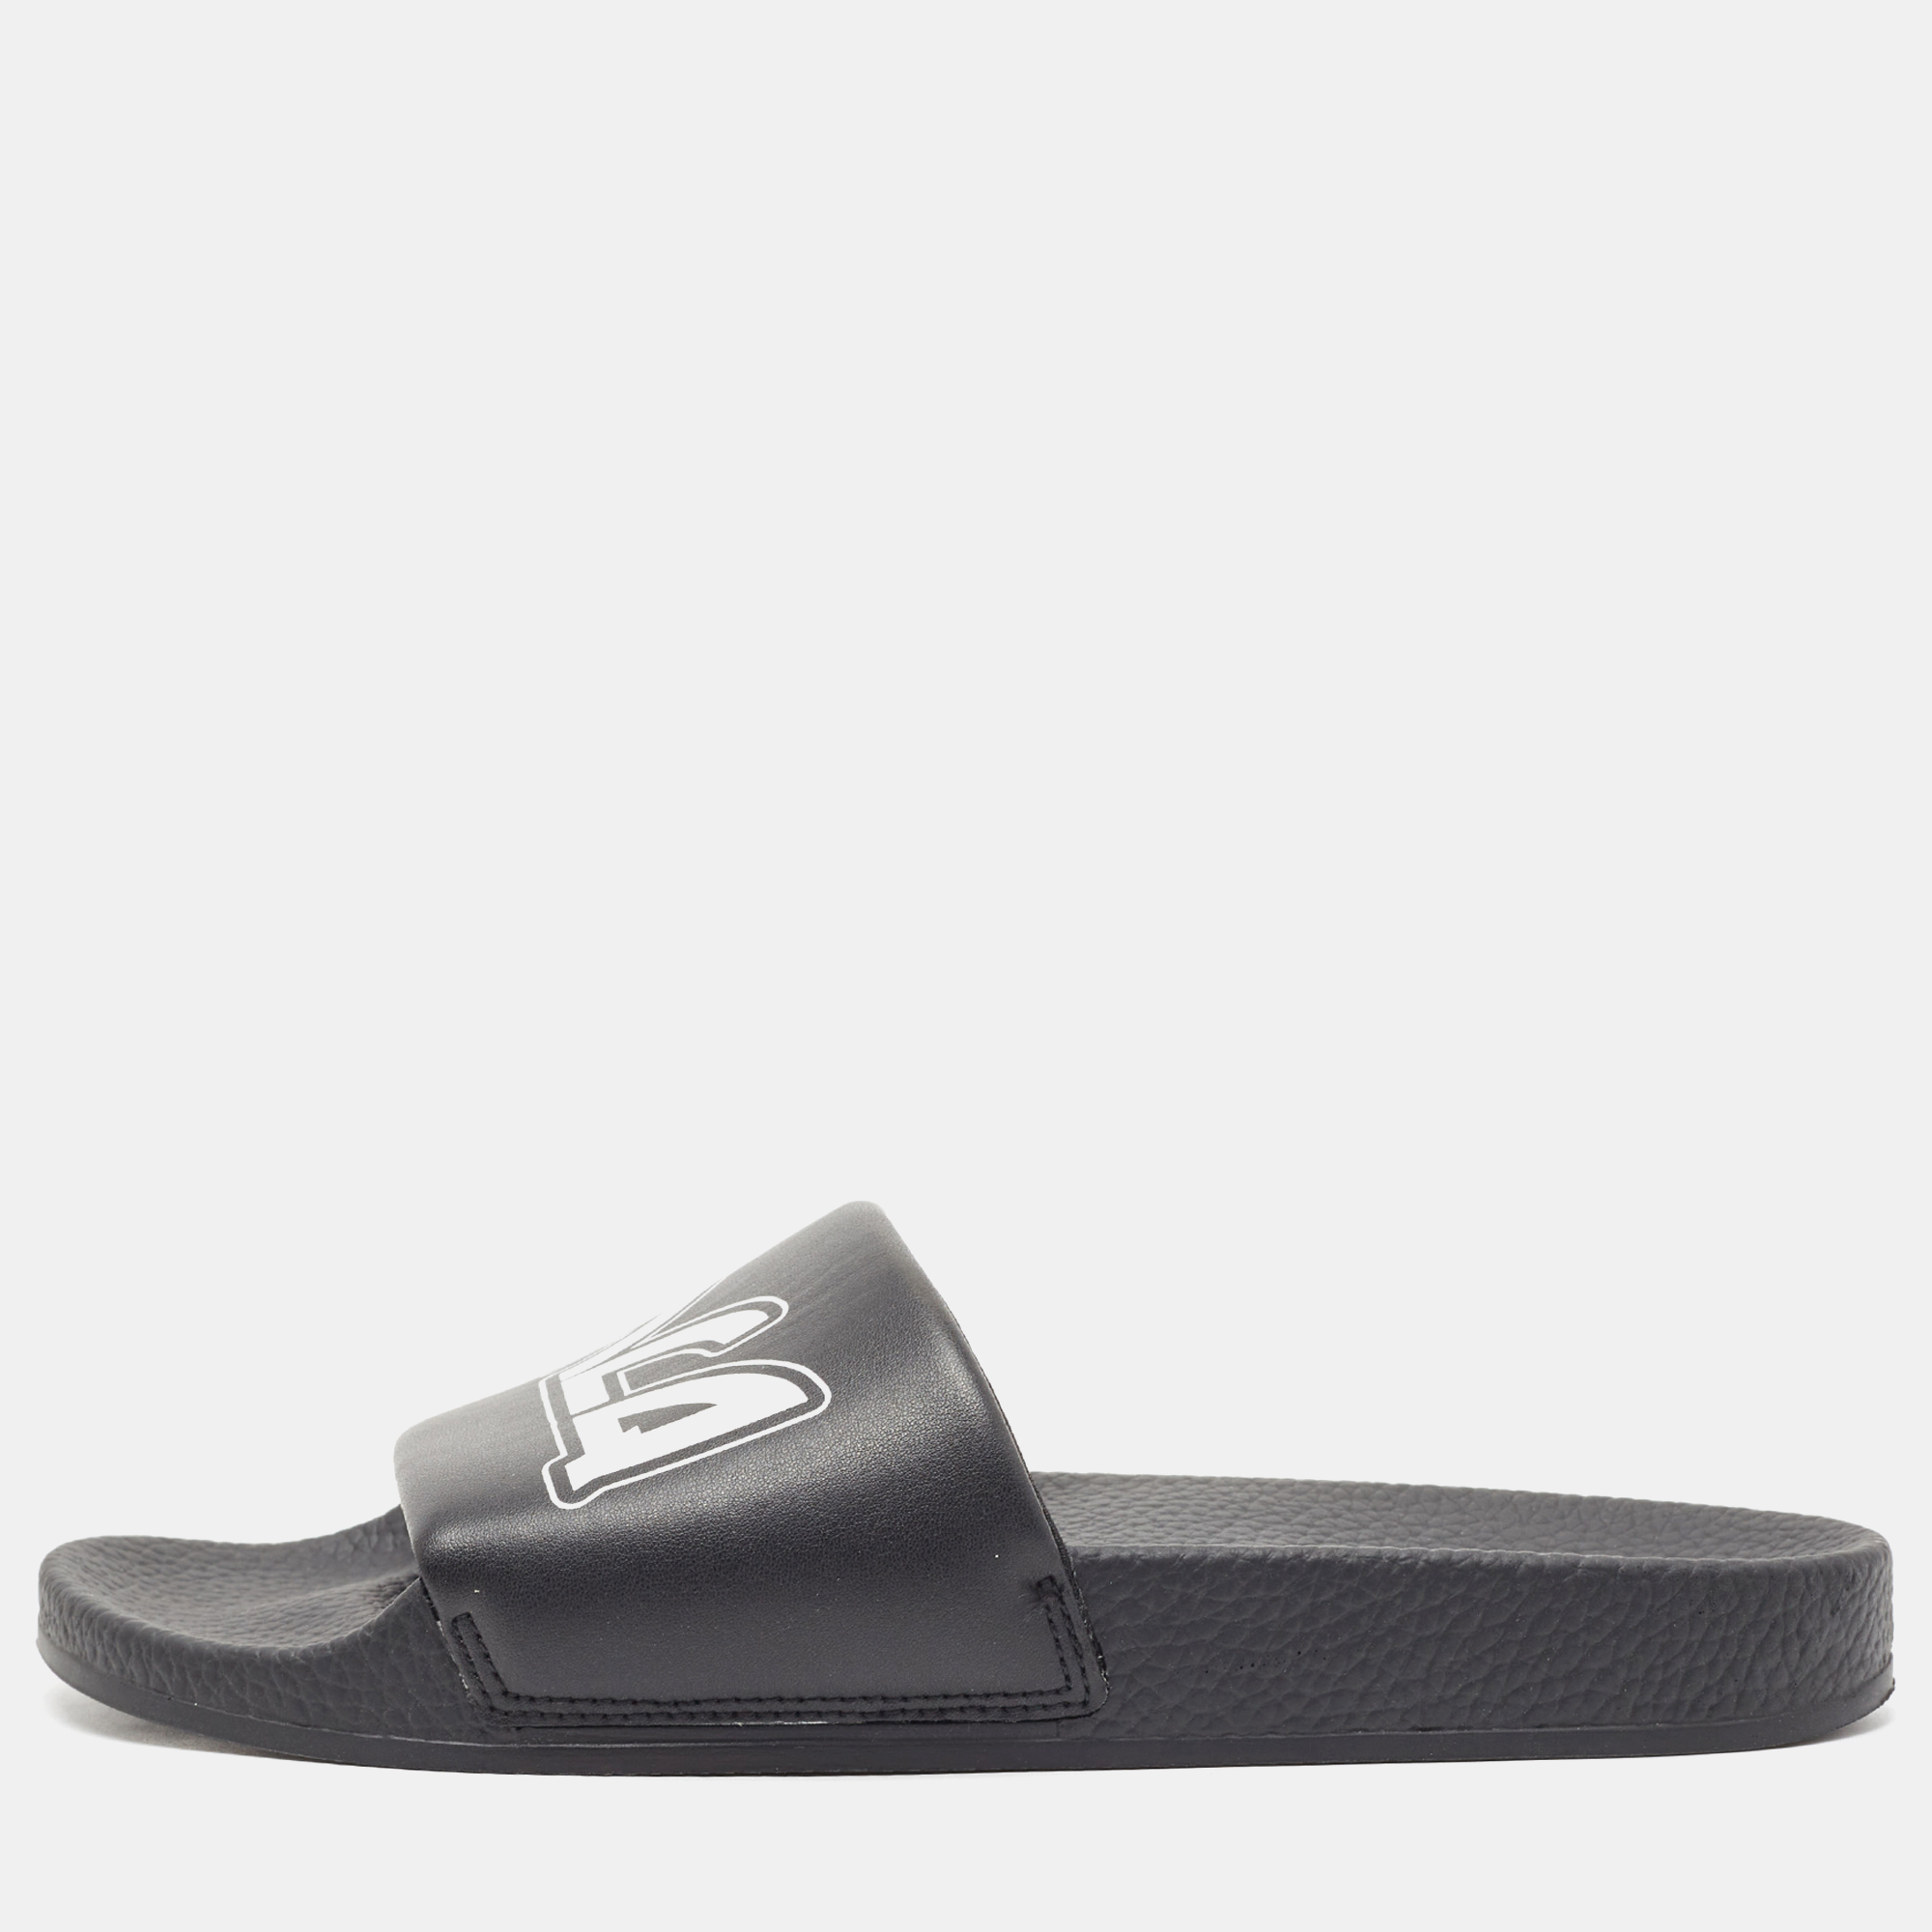 Mcq by alexander mcqueen black leather and rubber logo pool slides size 40